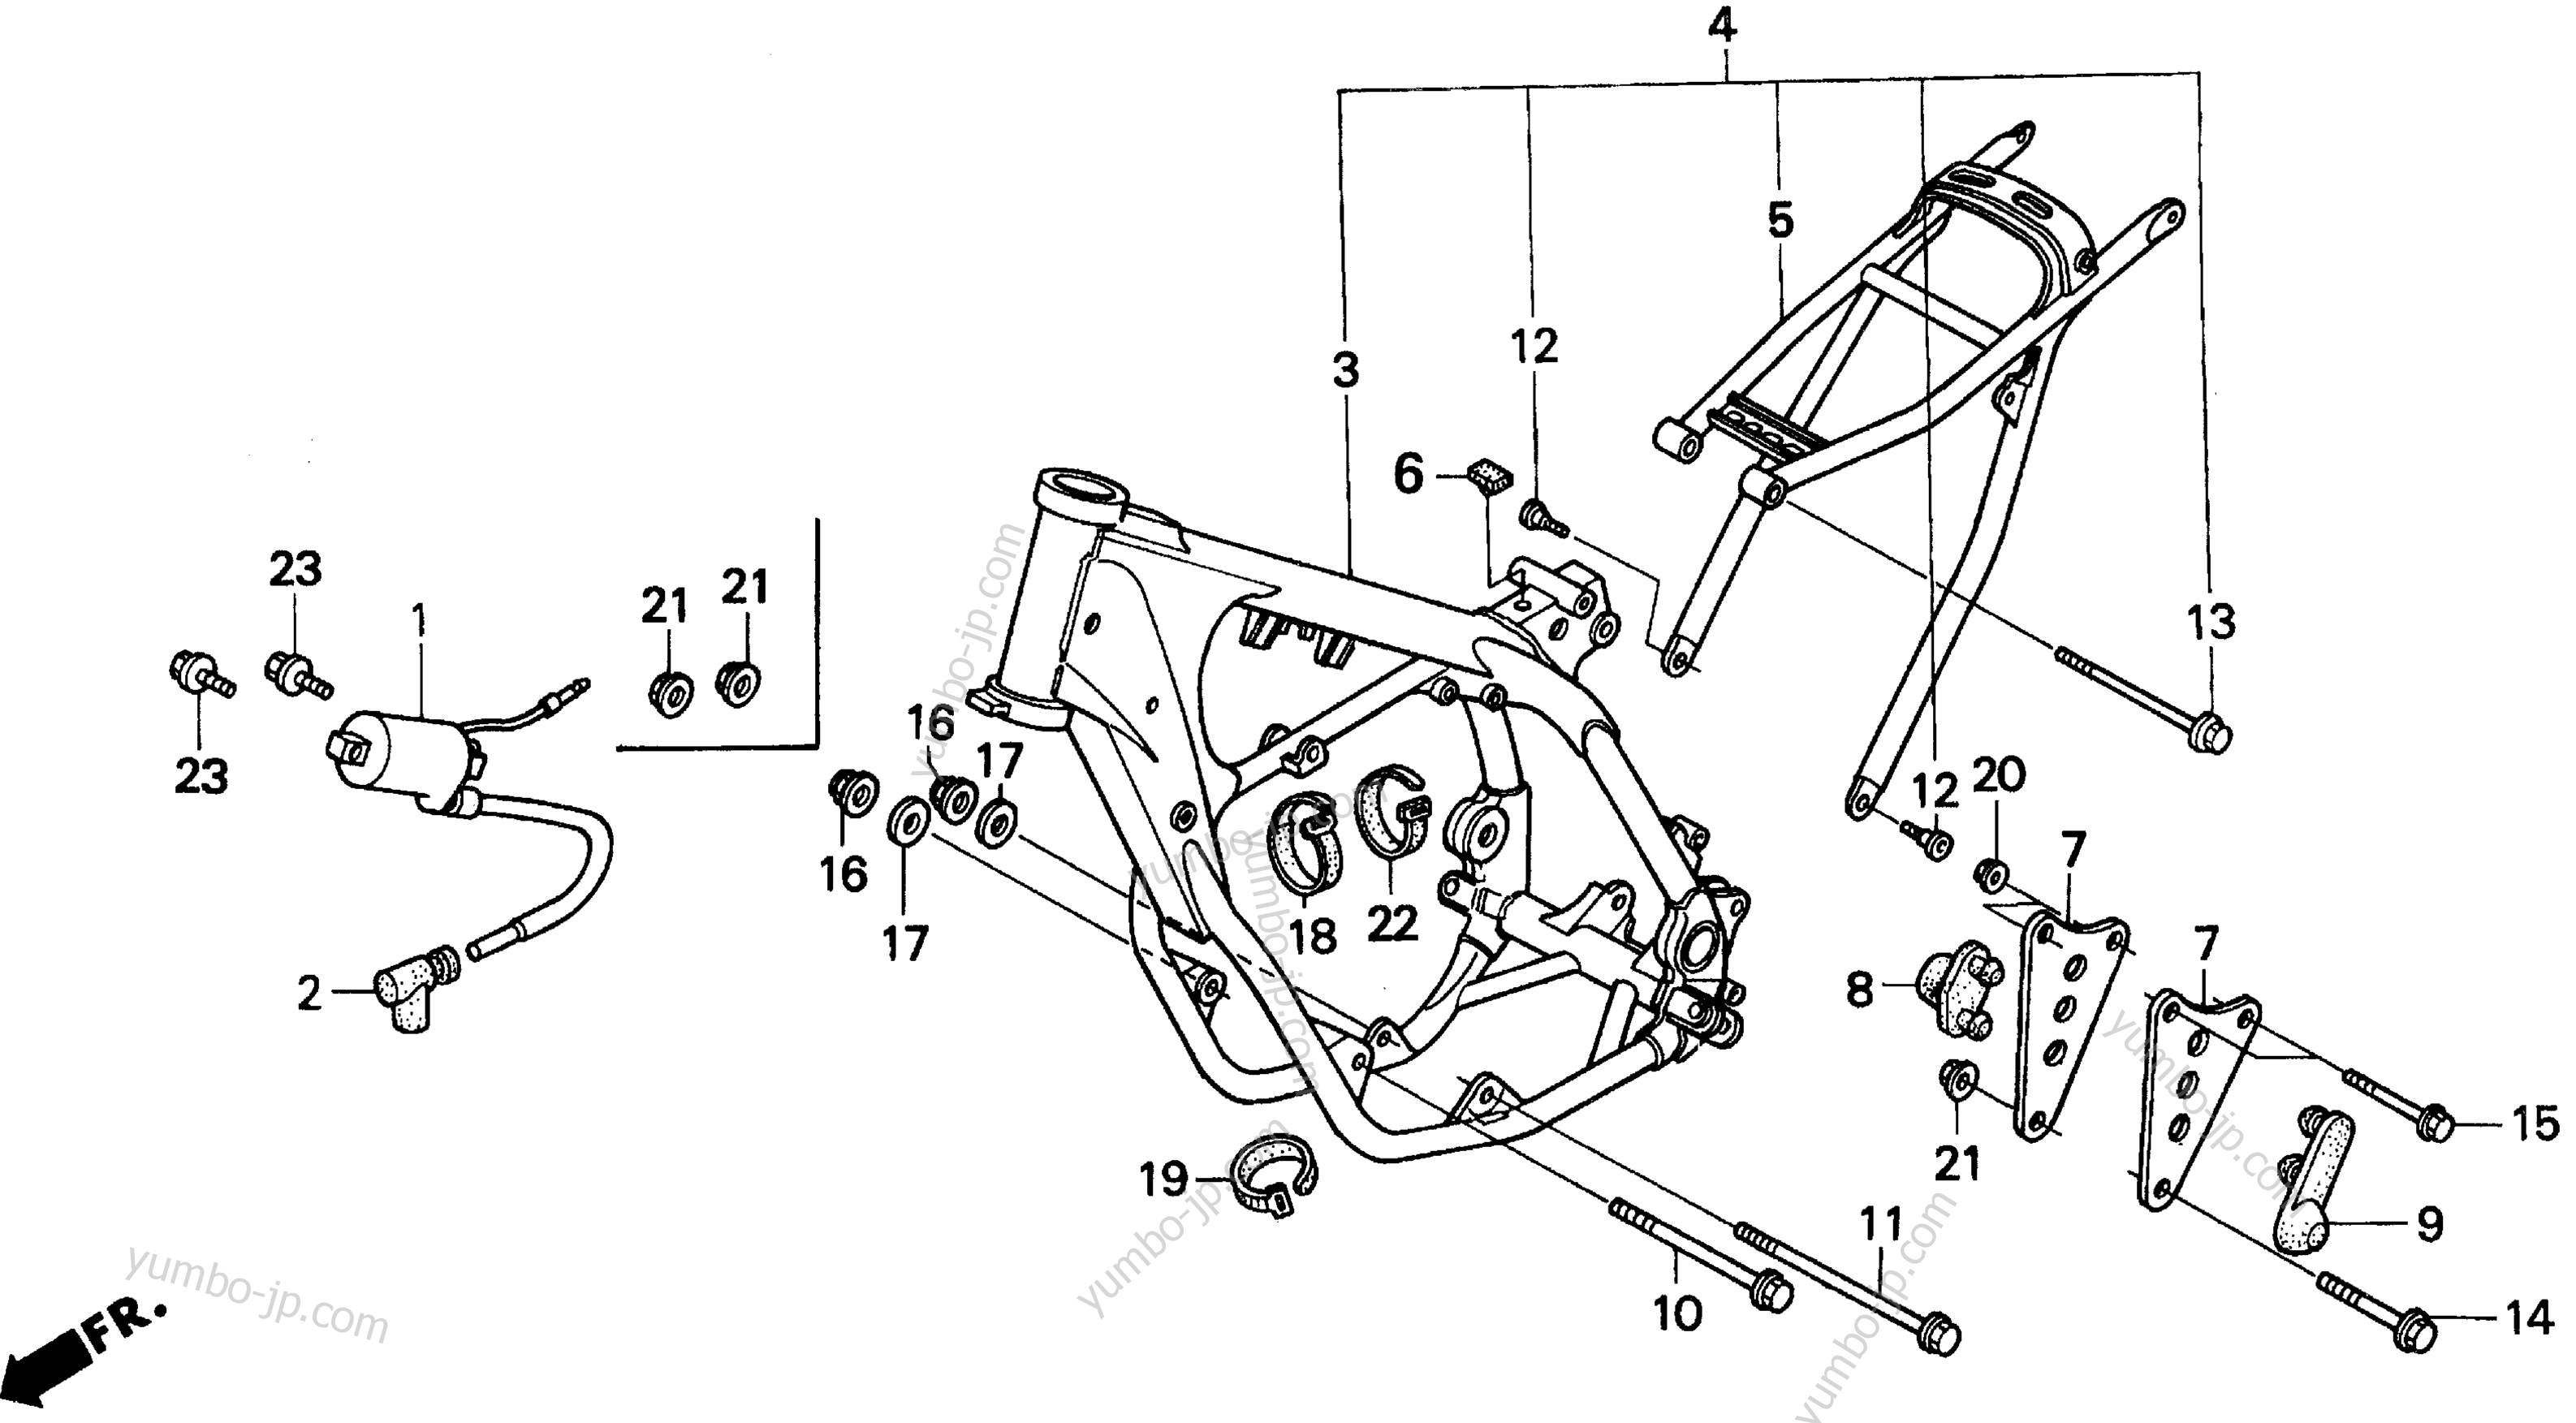 FRAME for motorcycles HONDA CR250R A 1994 year